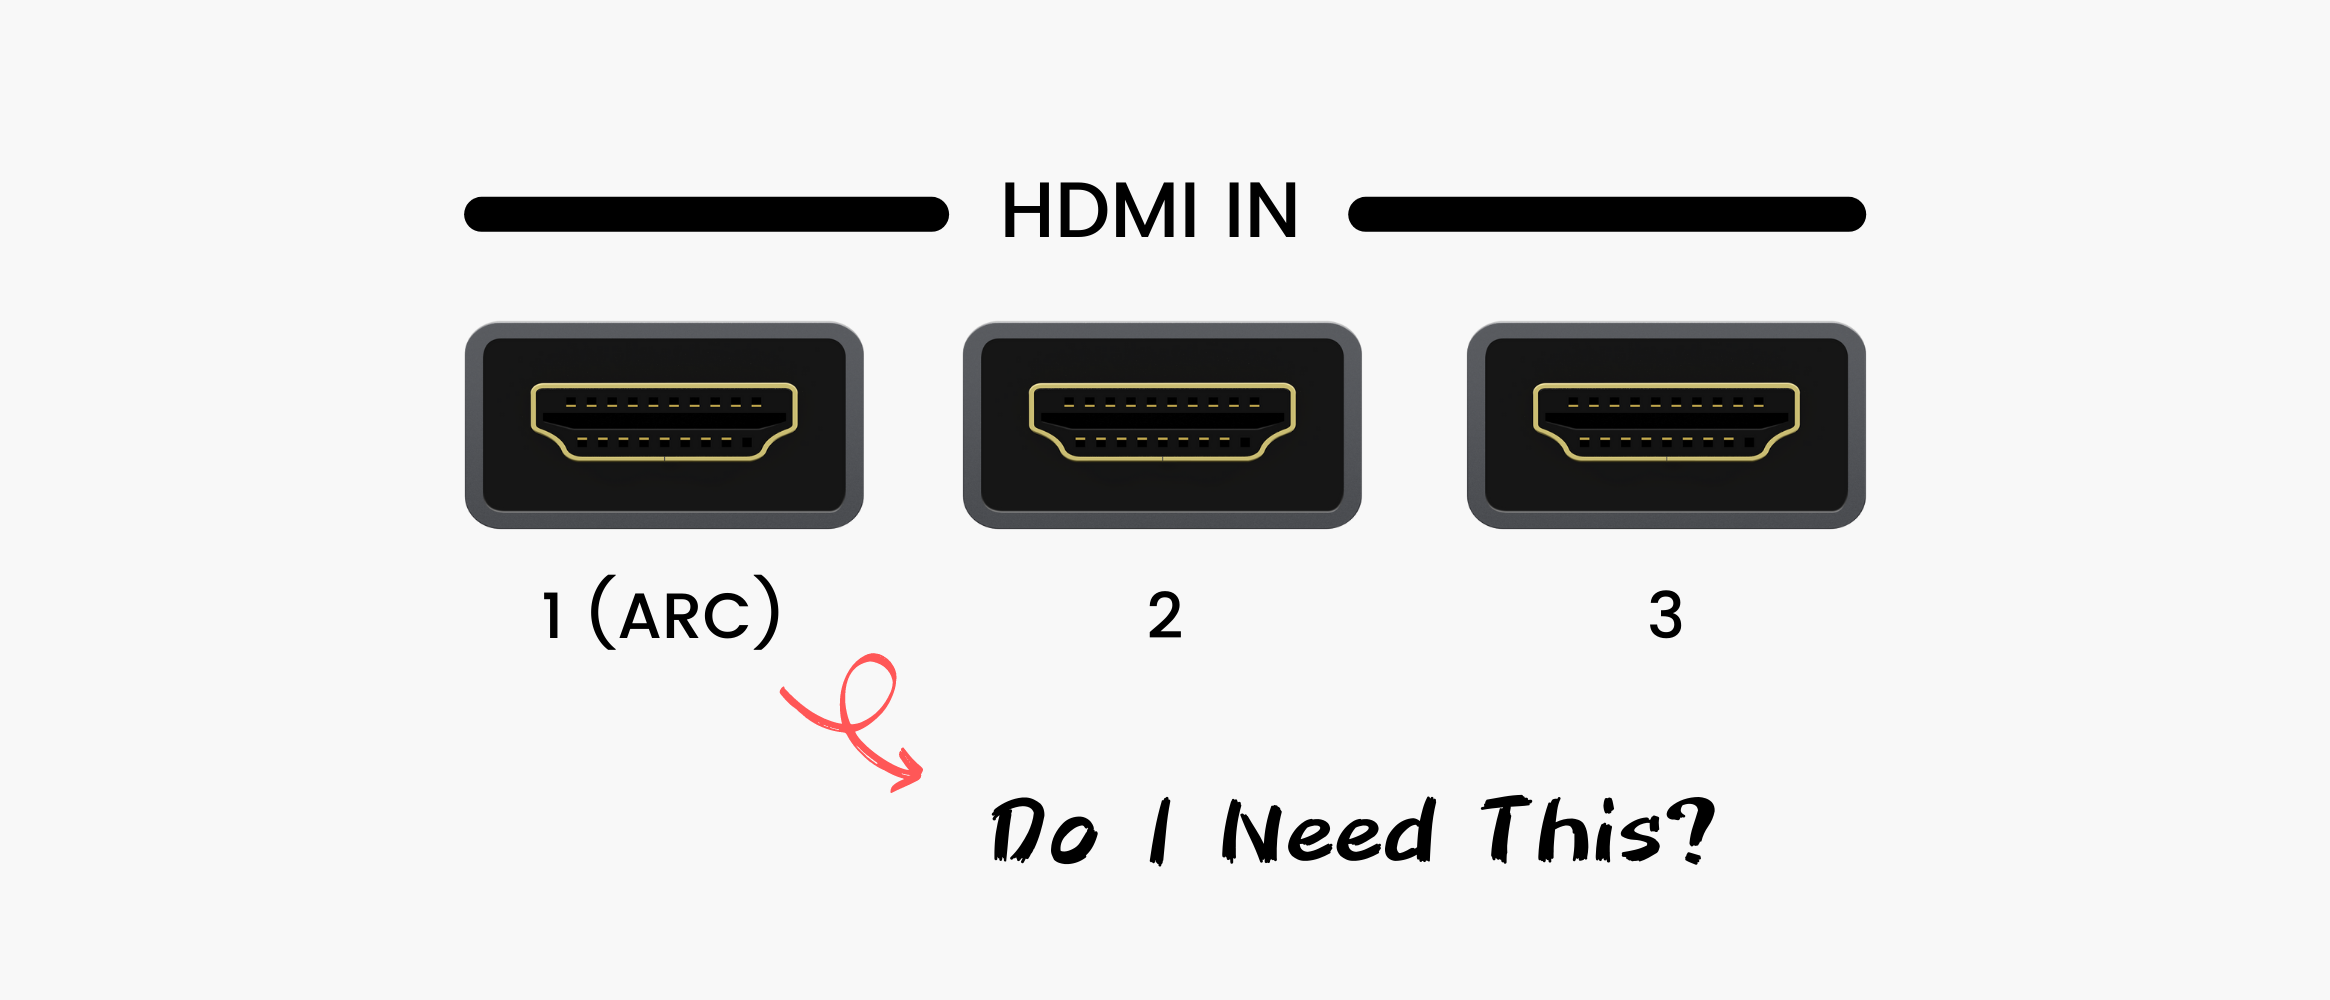 What Is HDMI?